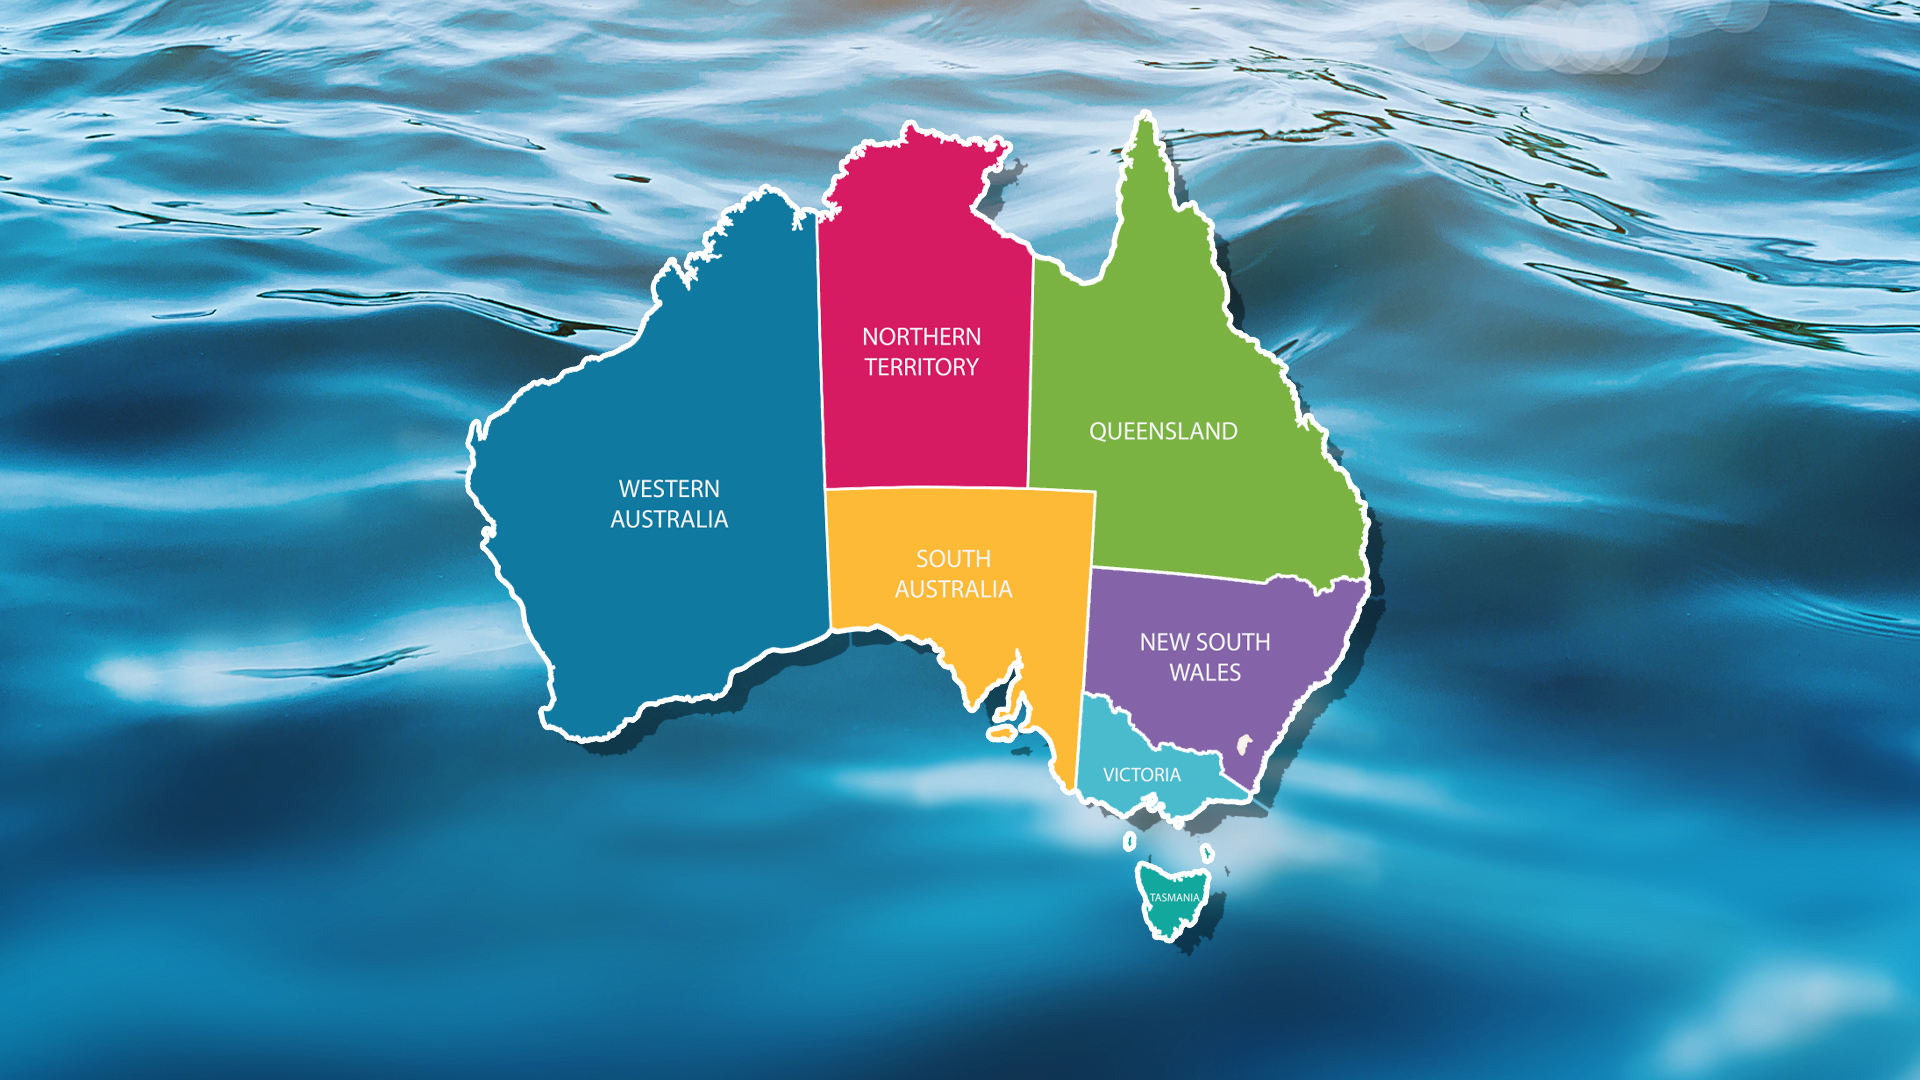 A map of Australia showing the different states